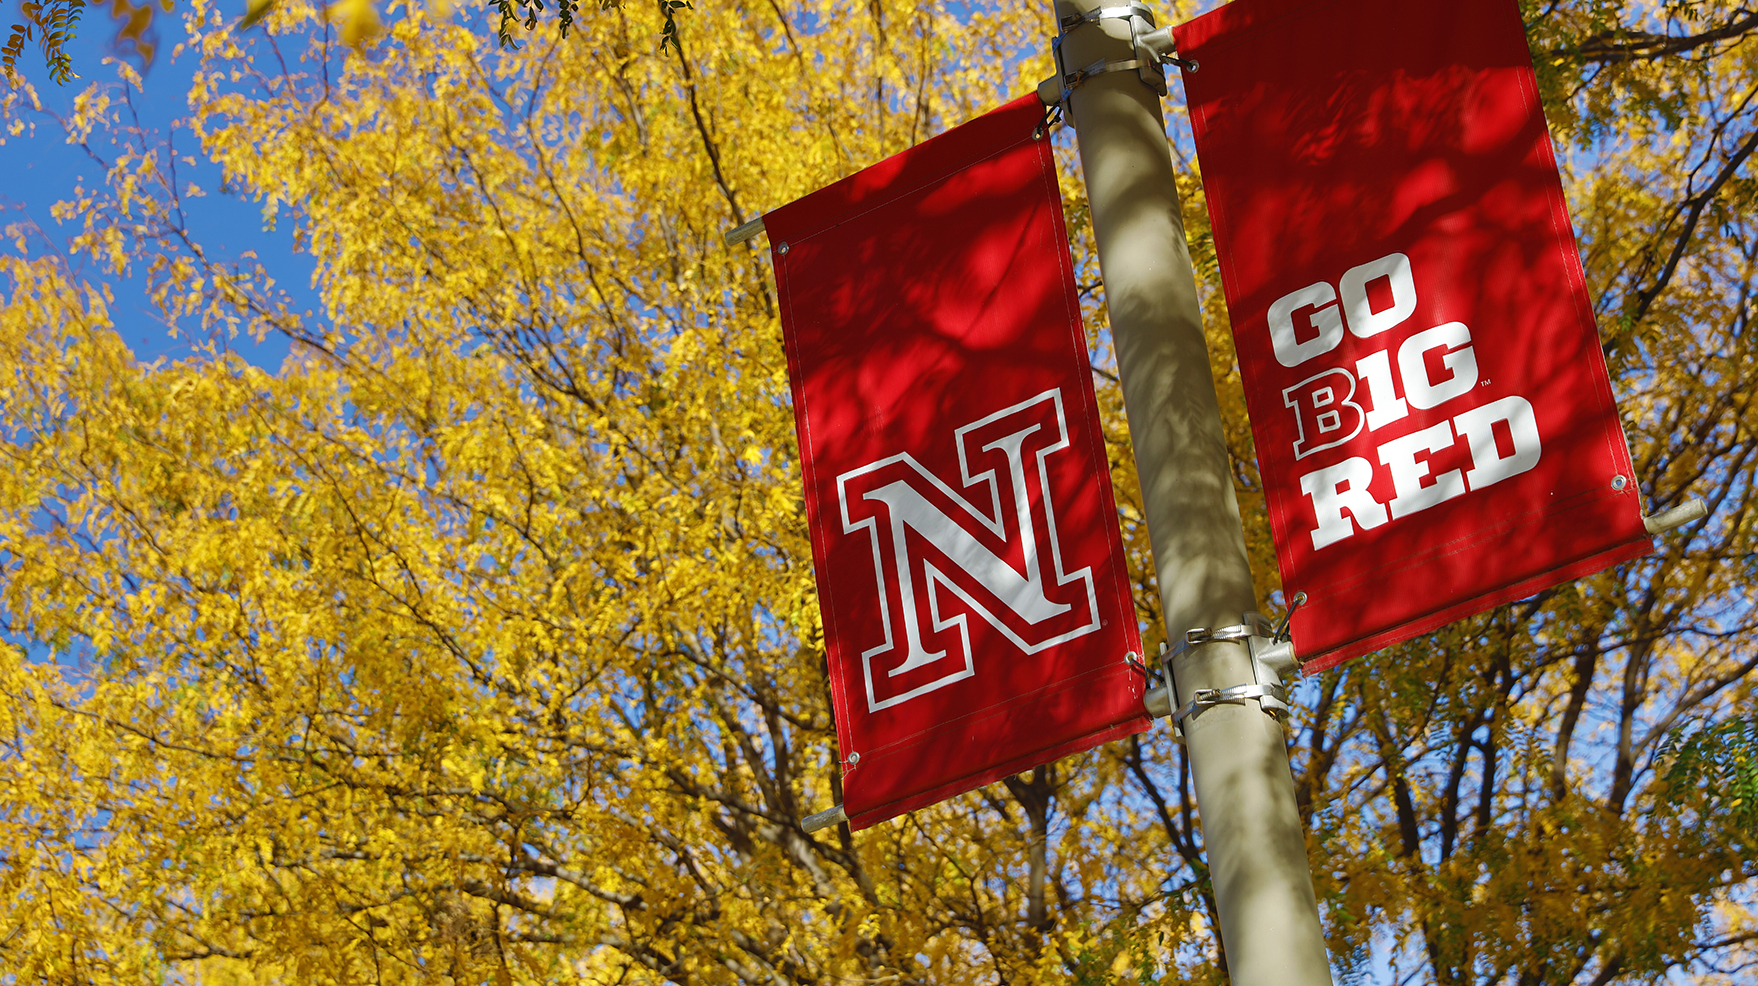 Wednesday, Nov. 24 is a student holiday, but university offices will still be open. 